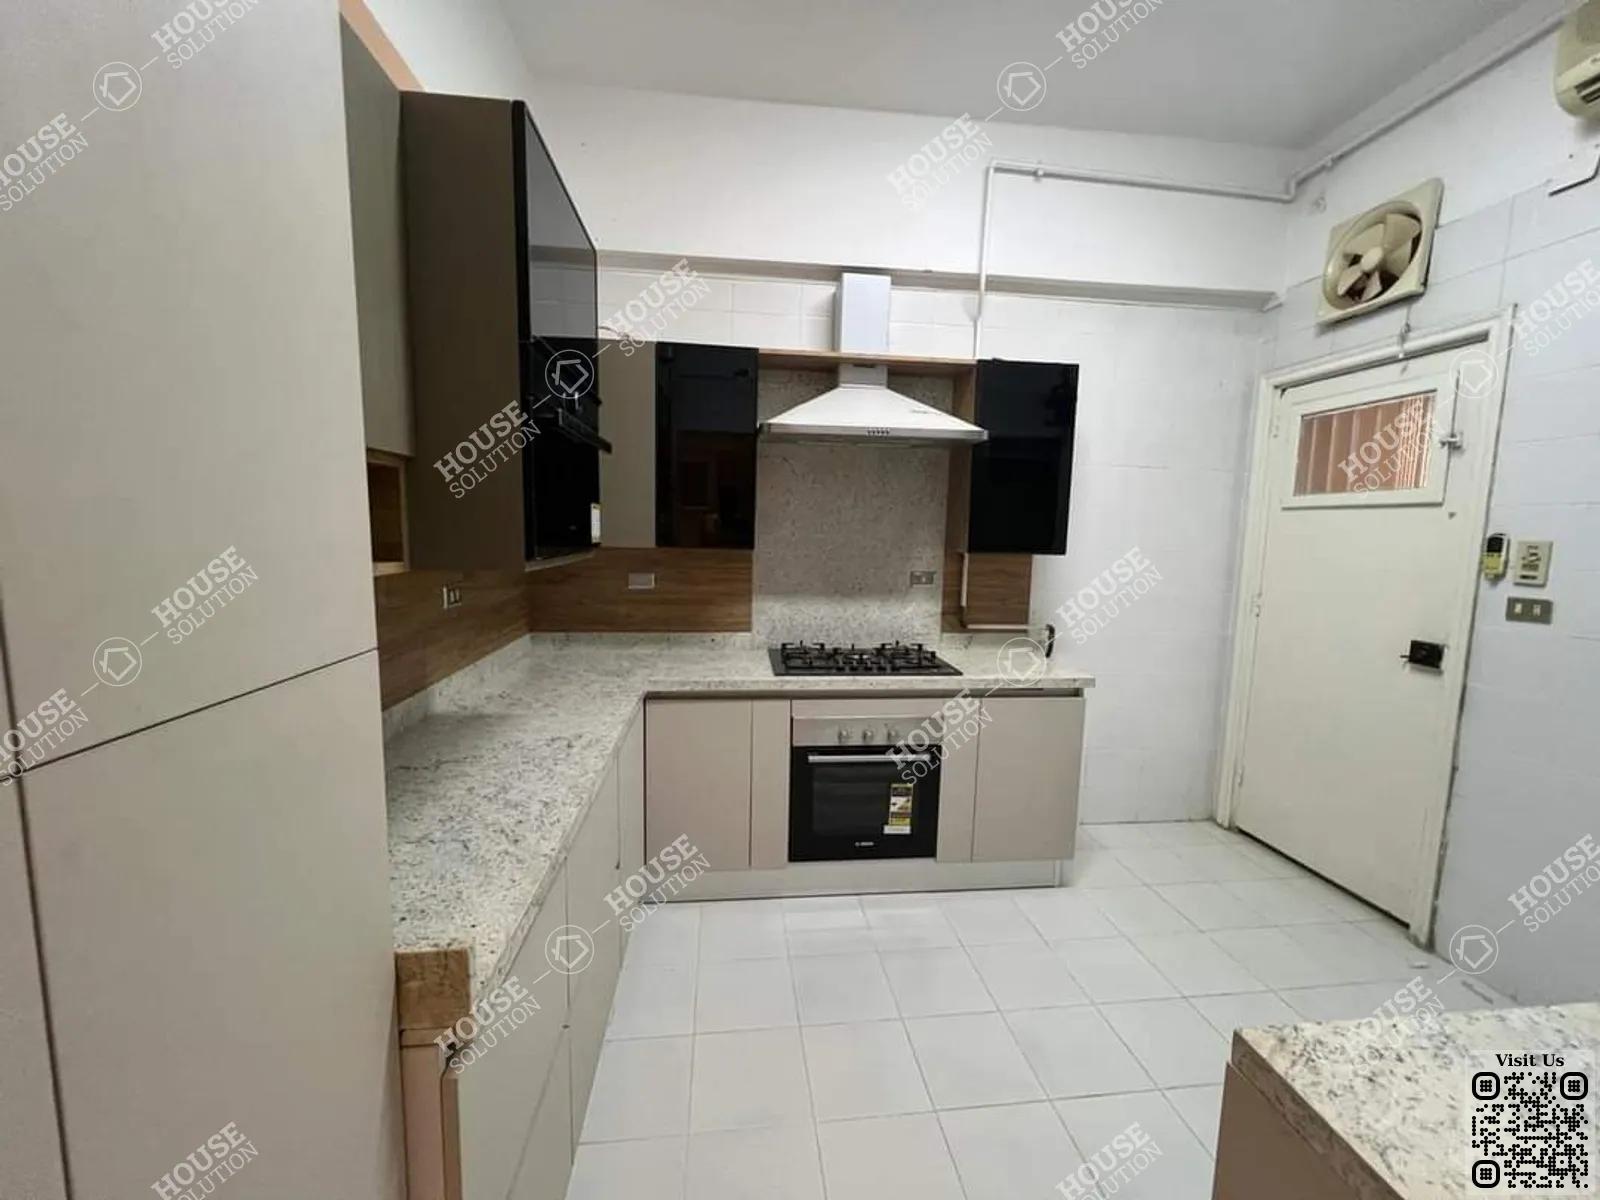 KITCHEN  @ Apartments For Rent In Maadi Maadi Sarayat Area: 265 m² consists of 3 Bedrooms 3 Bathrooms Modern furnished 5 stars #5913-2